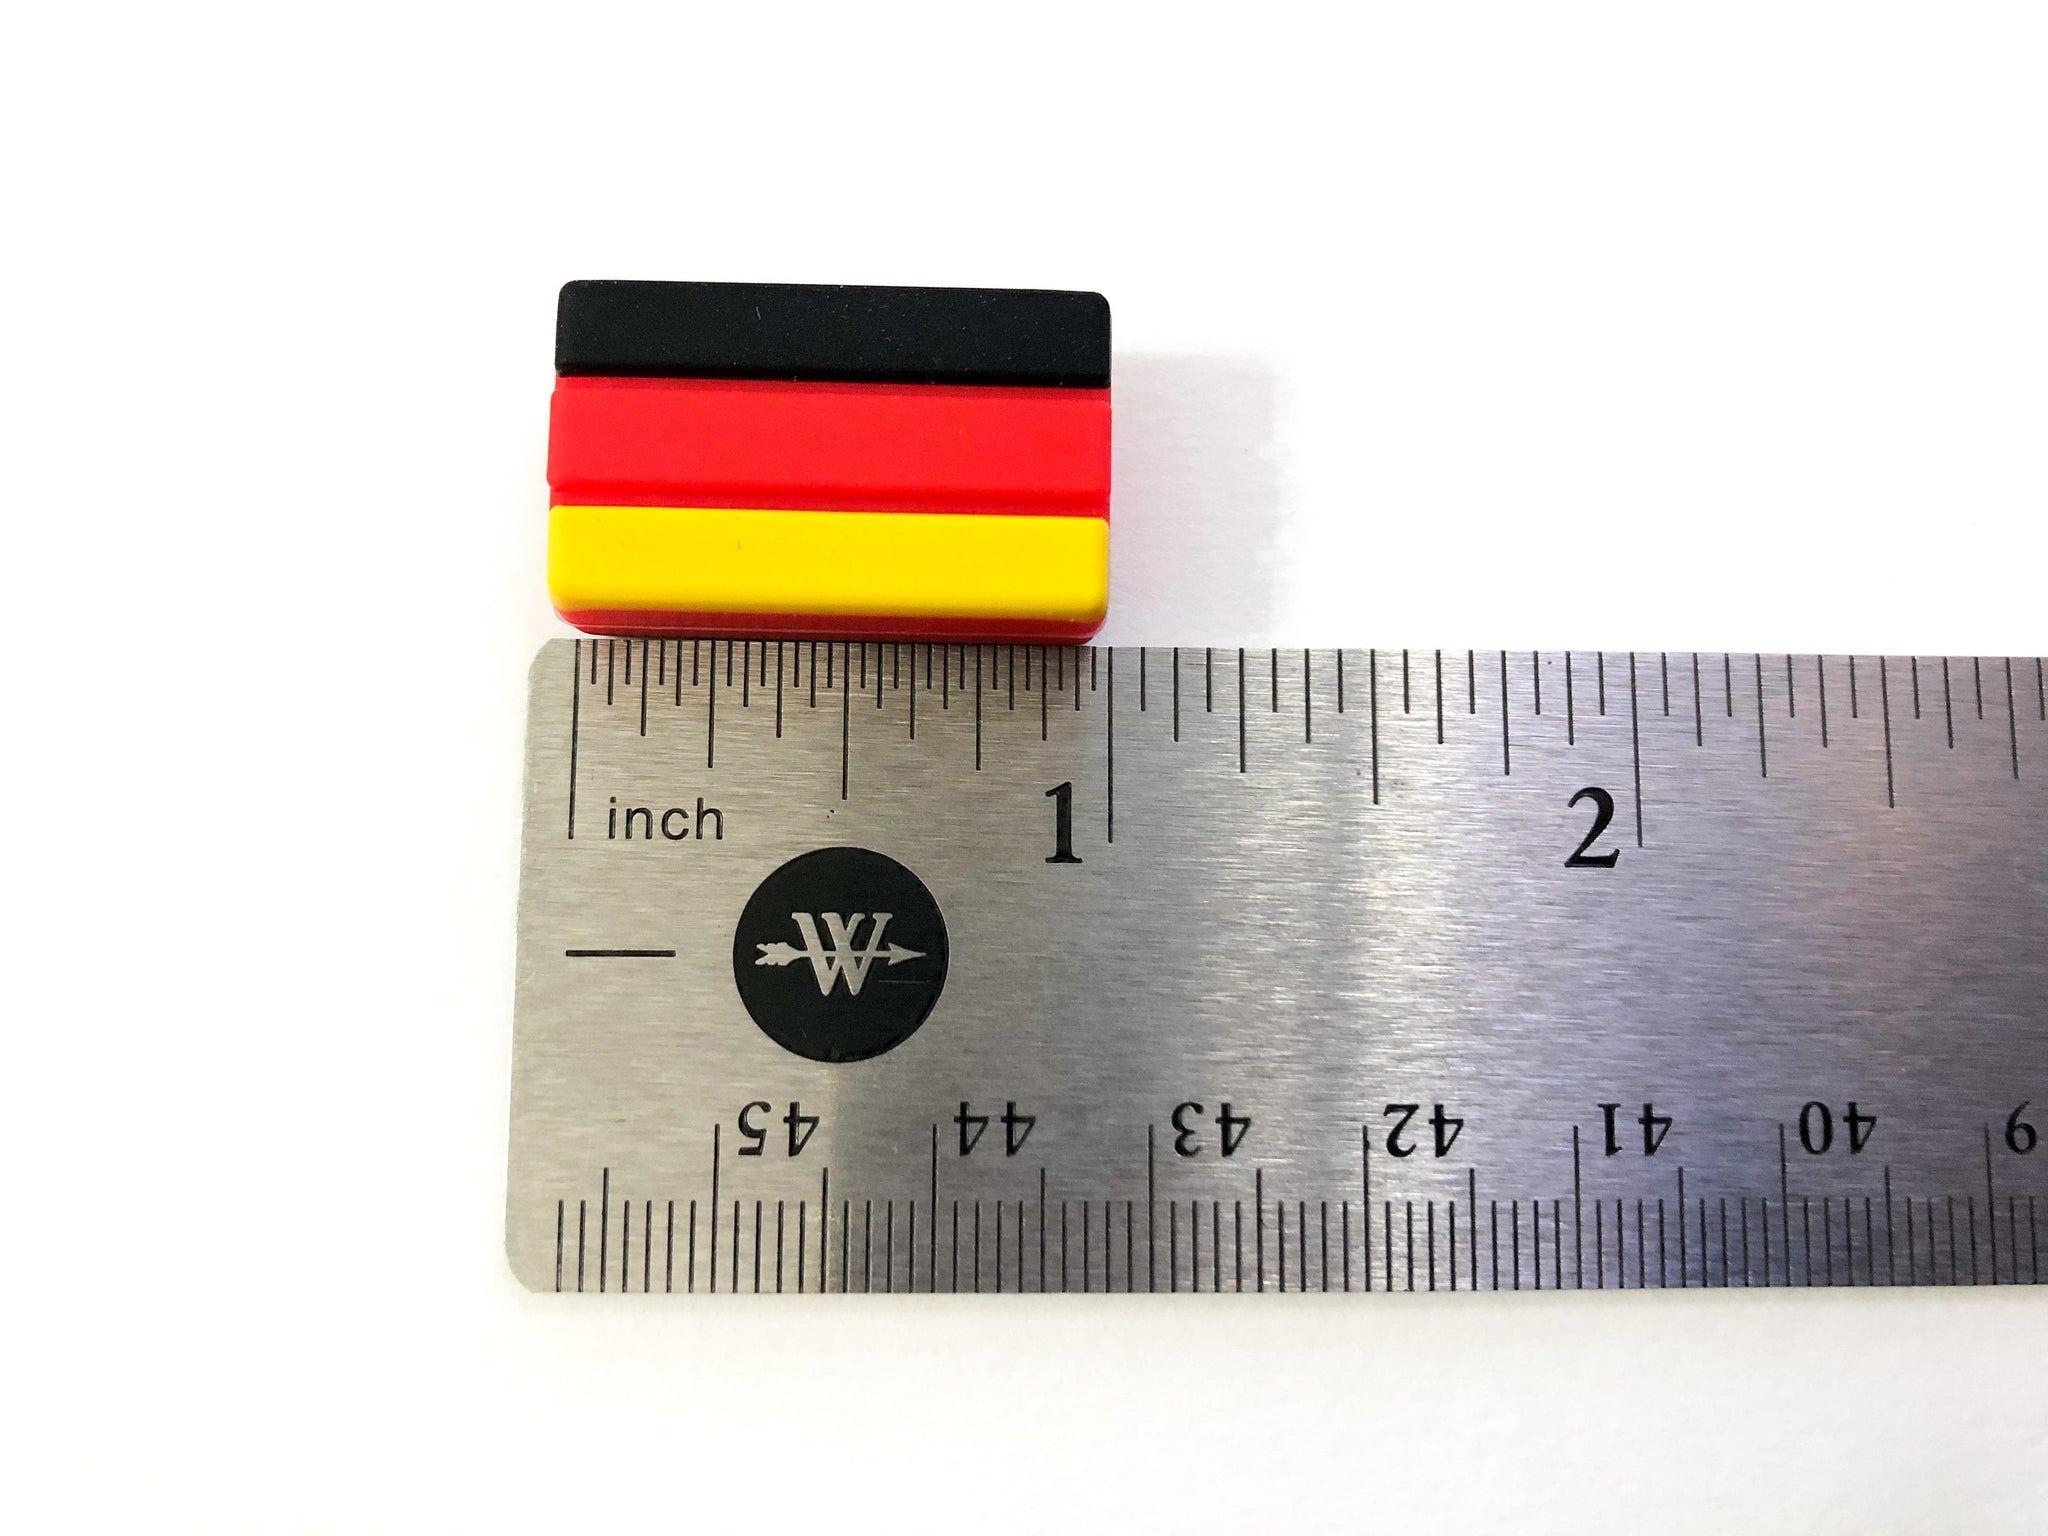 Silicone Germany Flag Focal Beads - Bulk Silicone Beads Wholesale - DI –  Tesla Baby